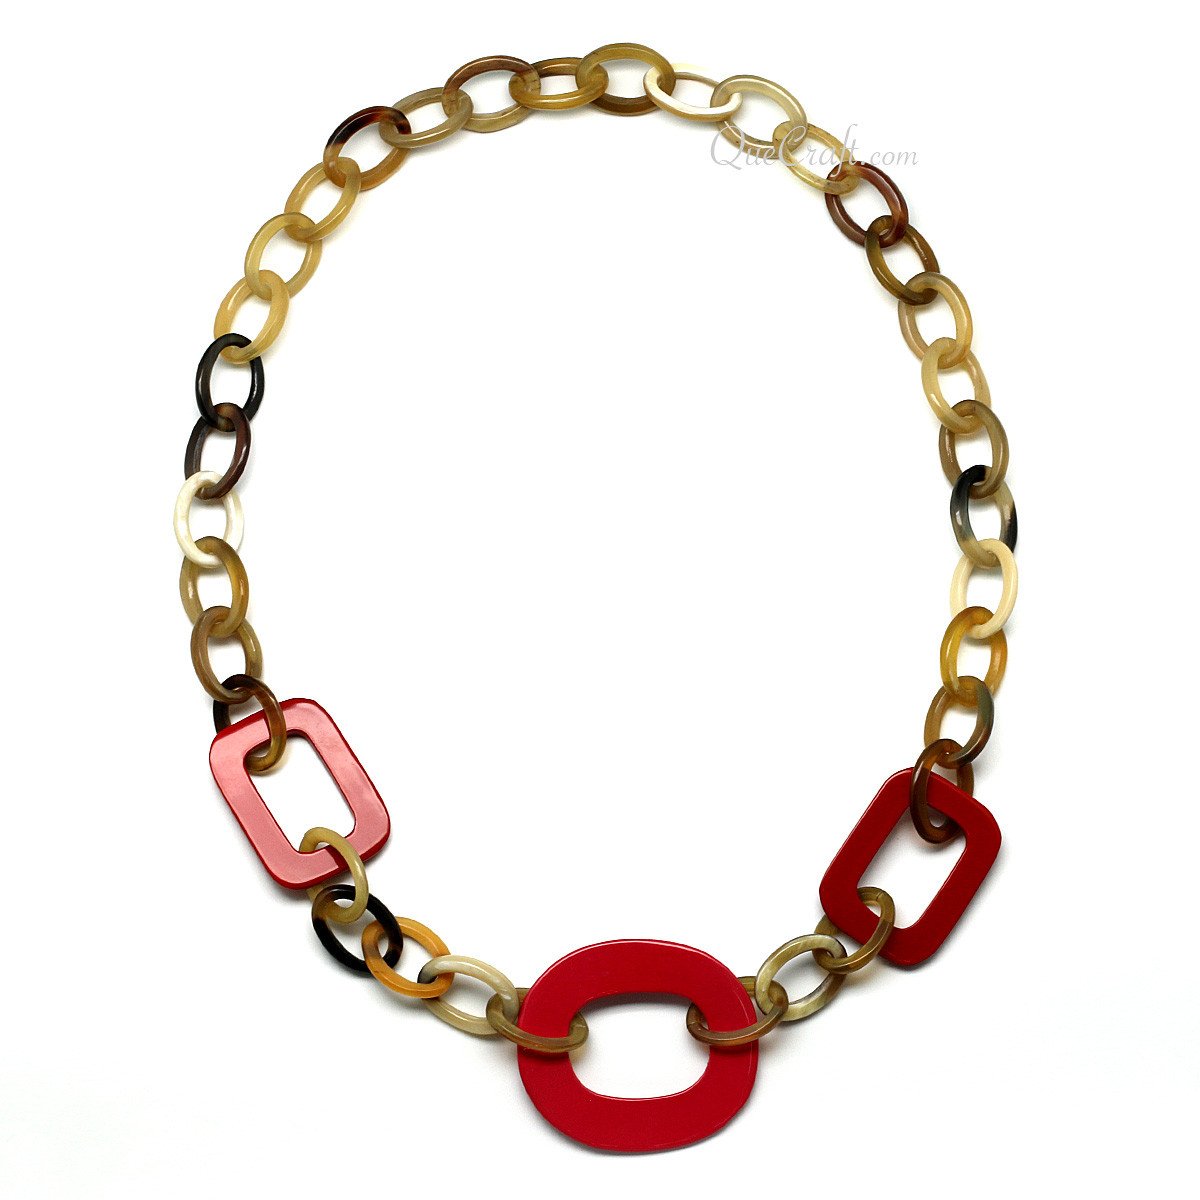 Horn & Lacquer Chain Necklace #11274 - HORN JEWELRY